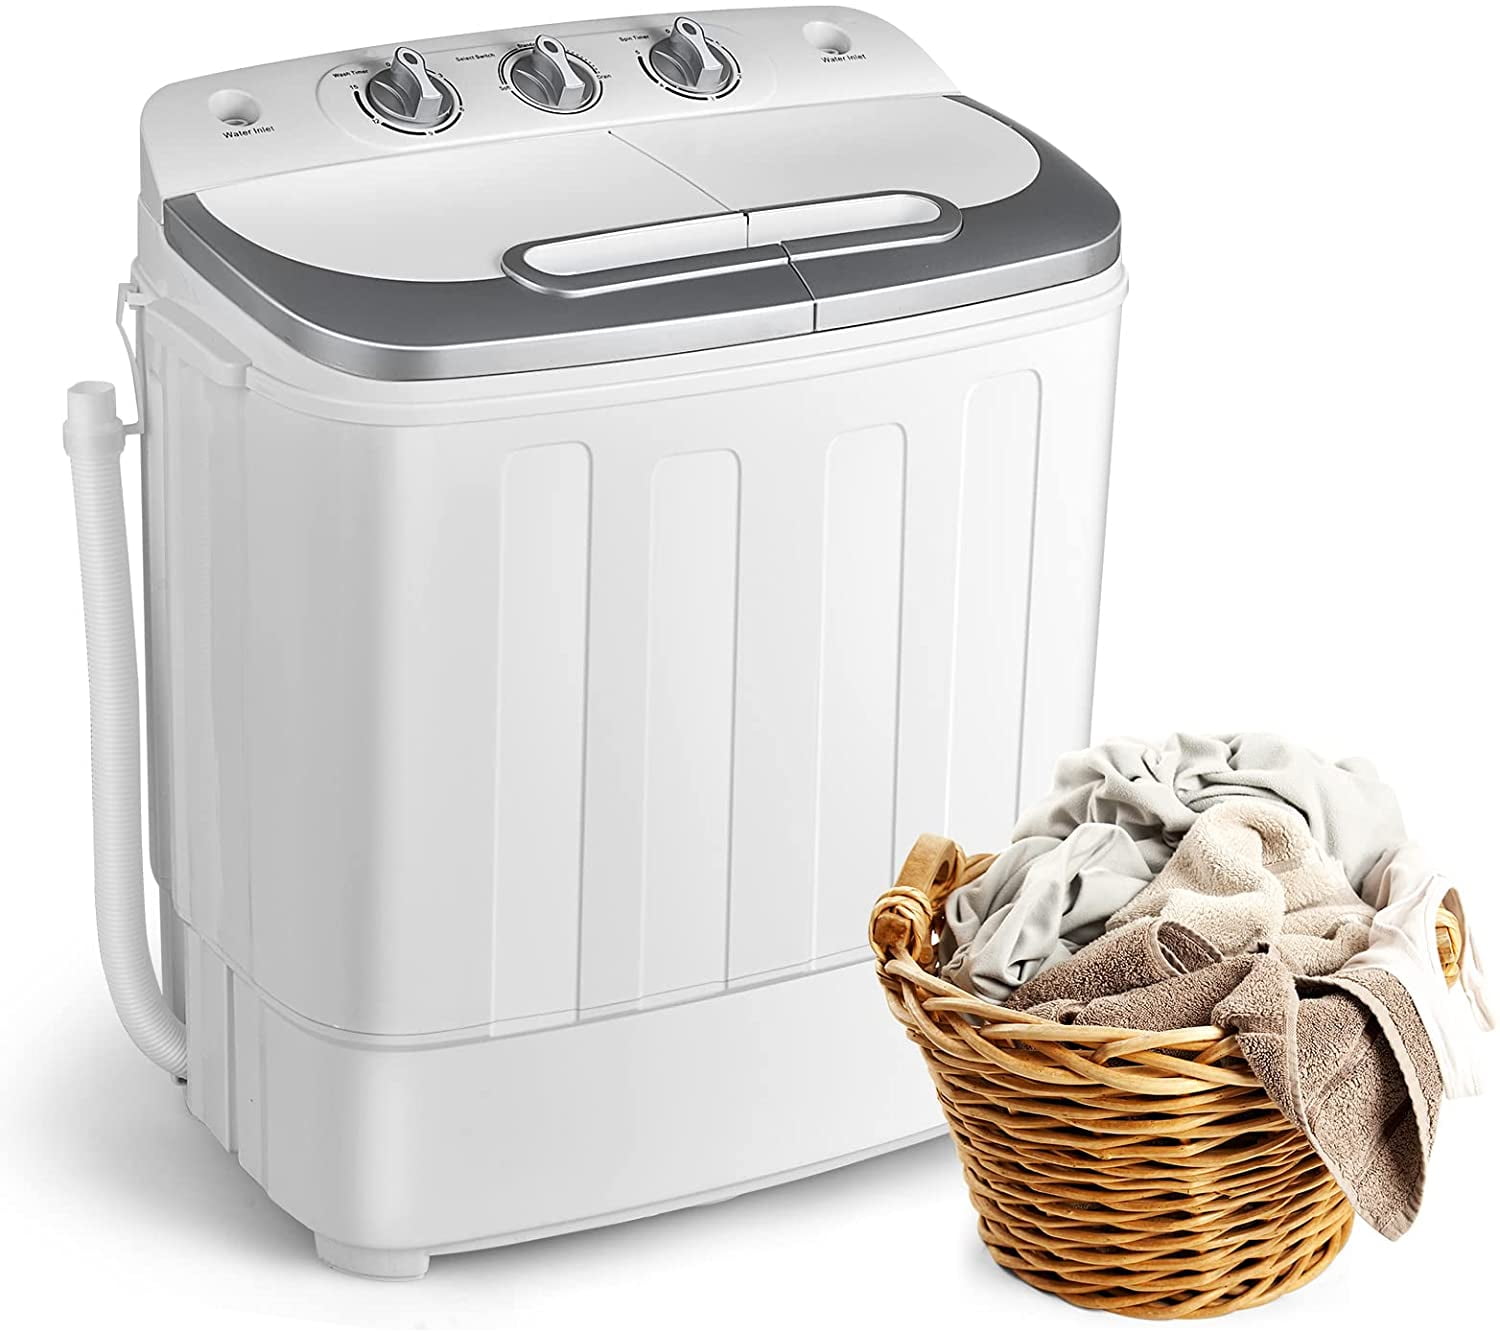 Portable Mini Washer 13lb Portable Washer Compact Twin Tub Machine Spinning  and Washing Combo 6.57 FT Inlet Gravity Drain Hose for Laundry, Dorms